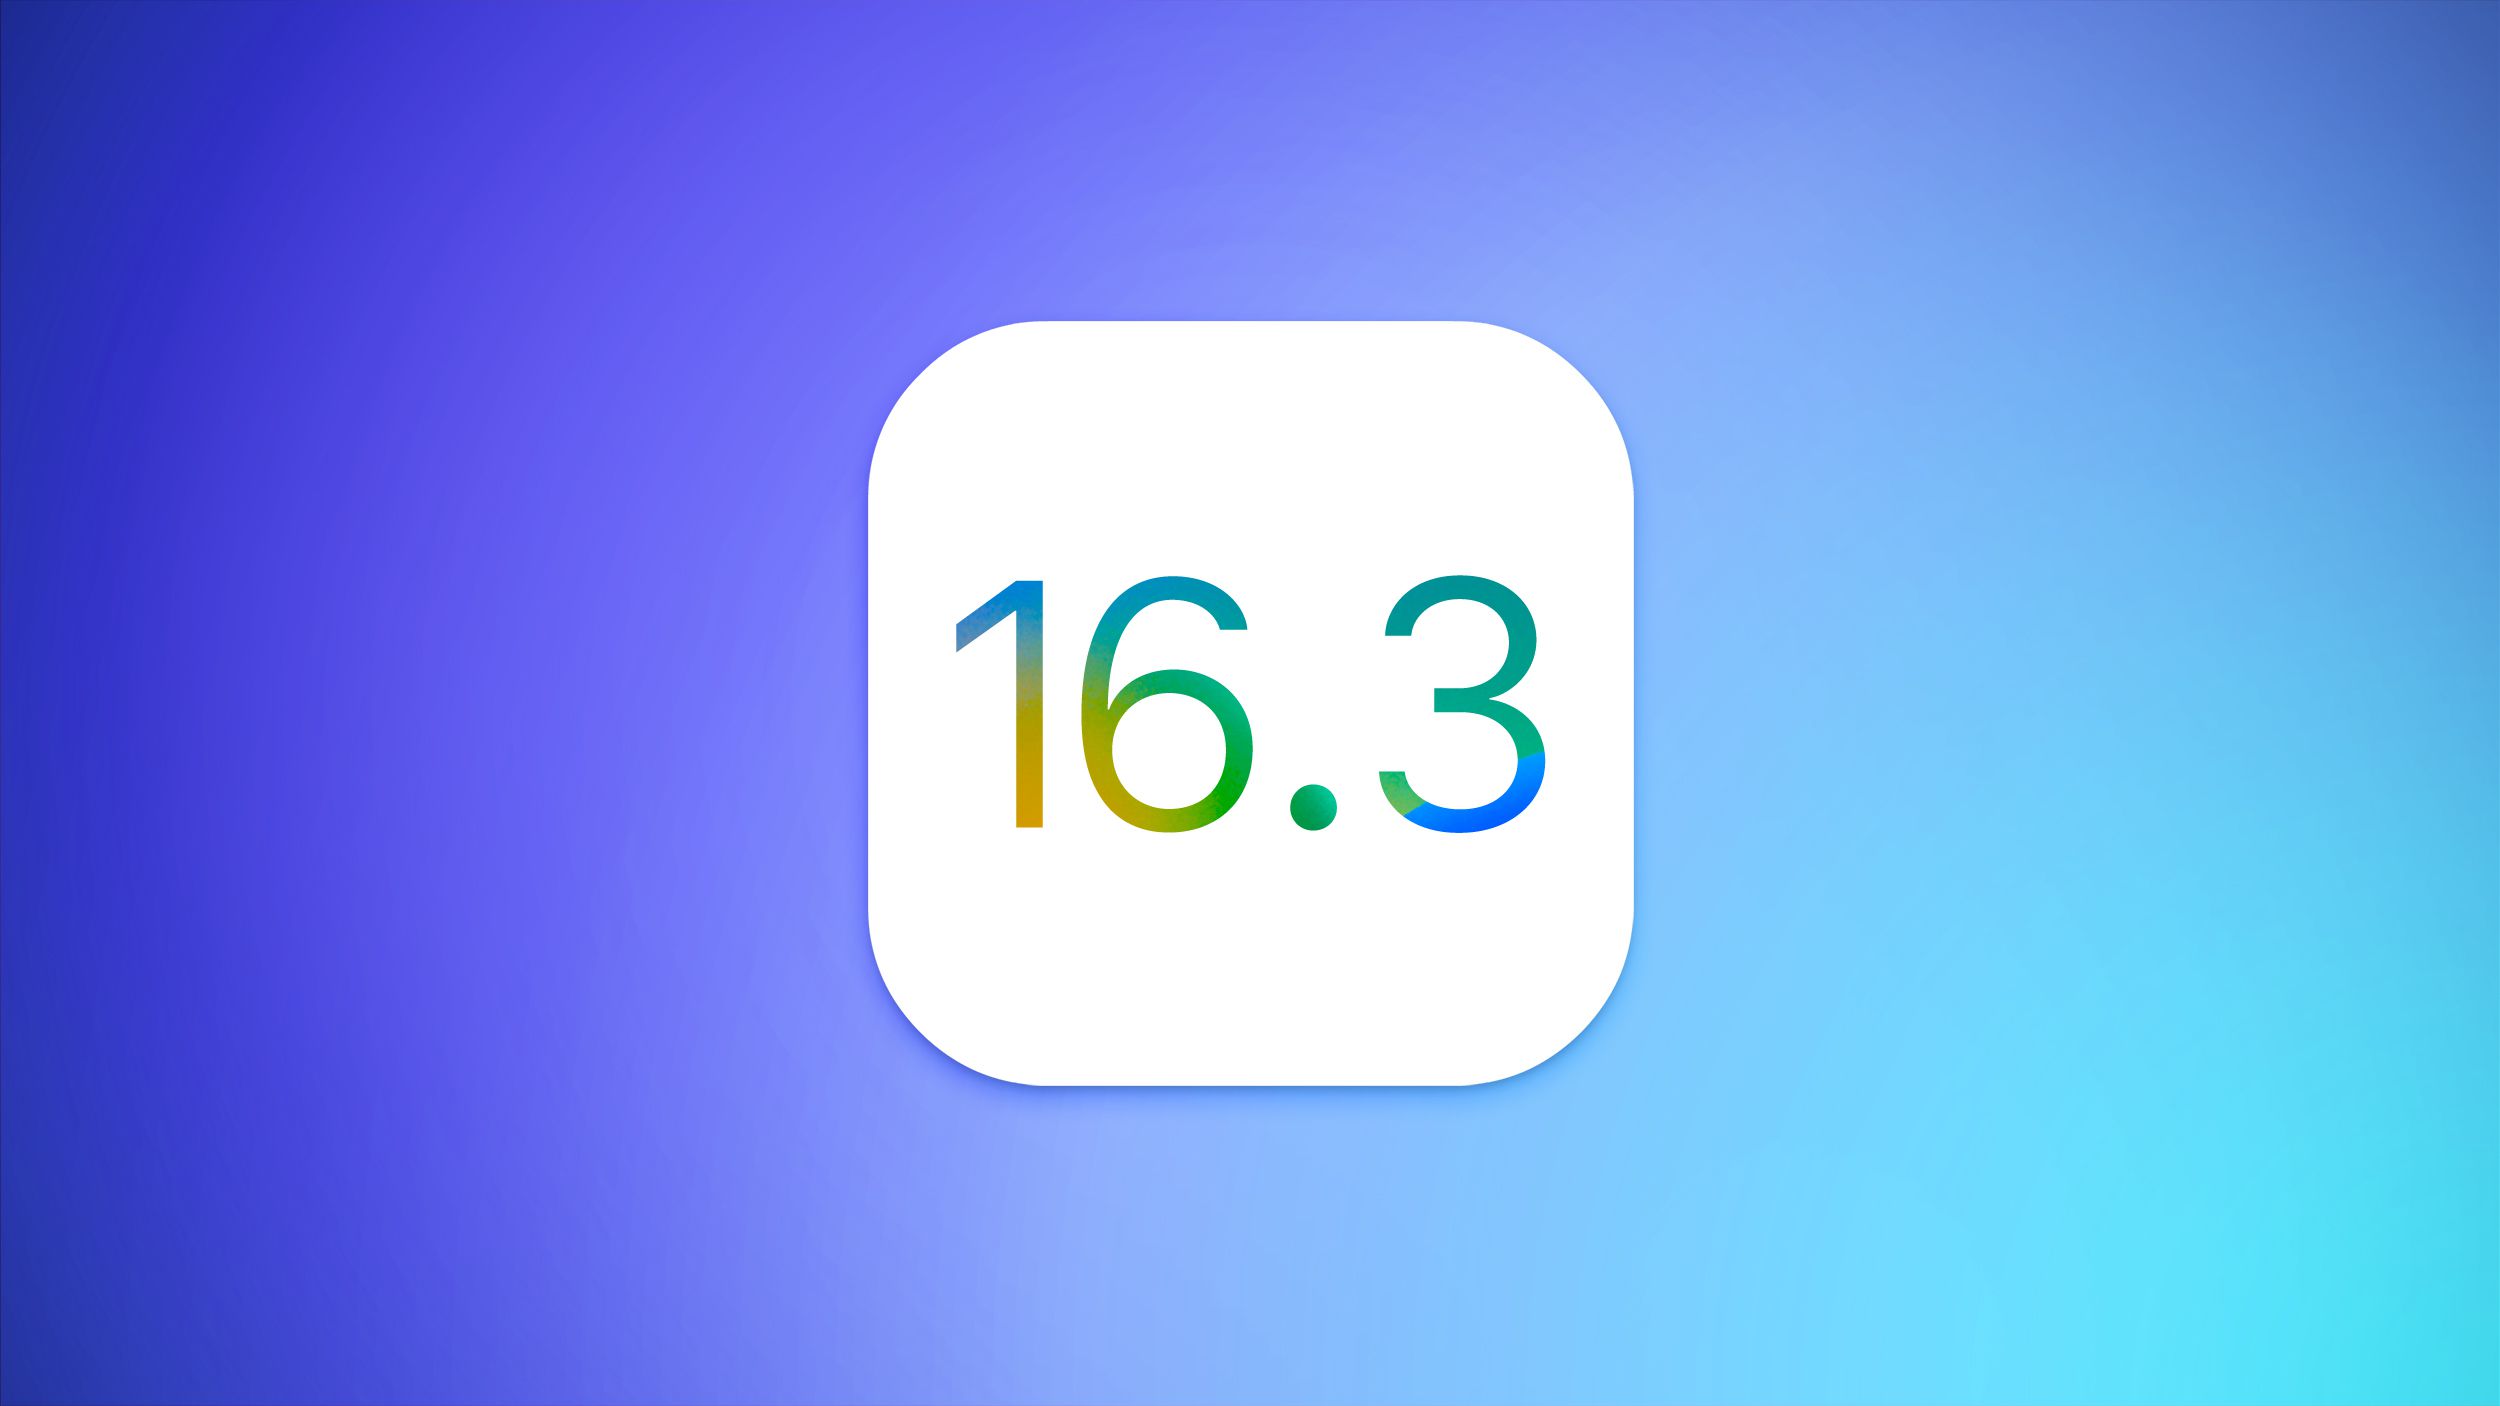 Apple Seeds Second Betas of iOS 16.3 and iPadOS 16.3 to Developers - MacRumors